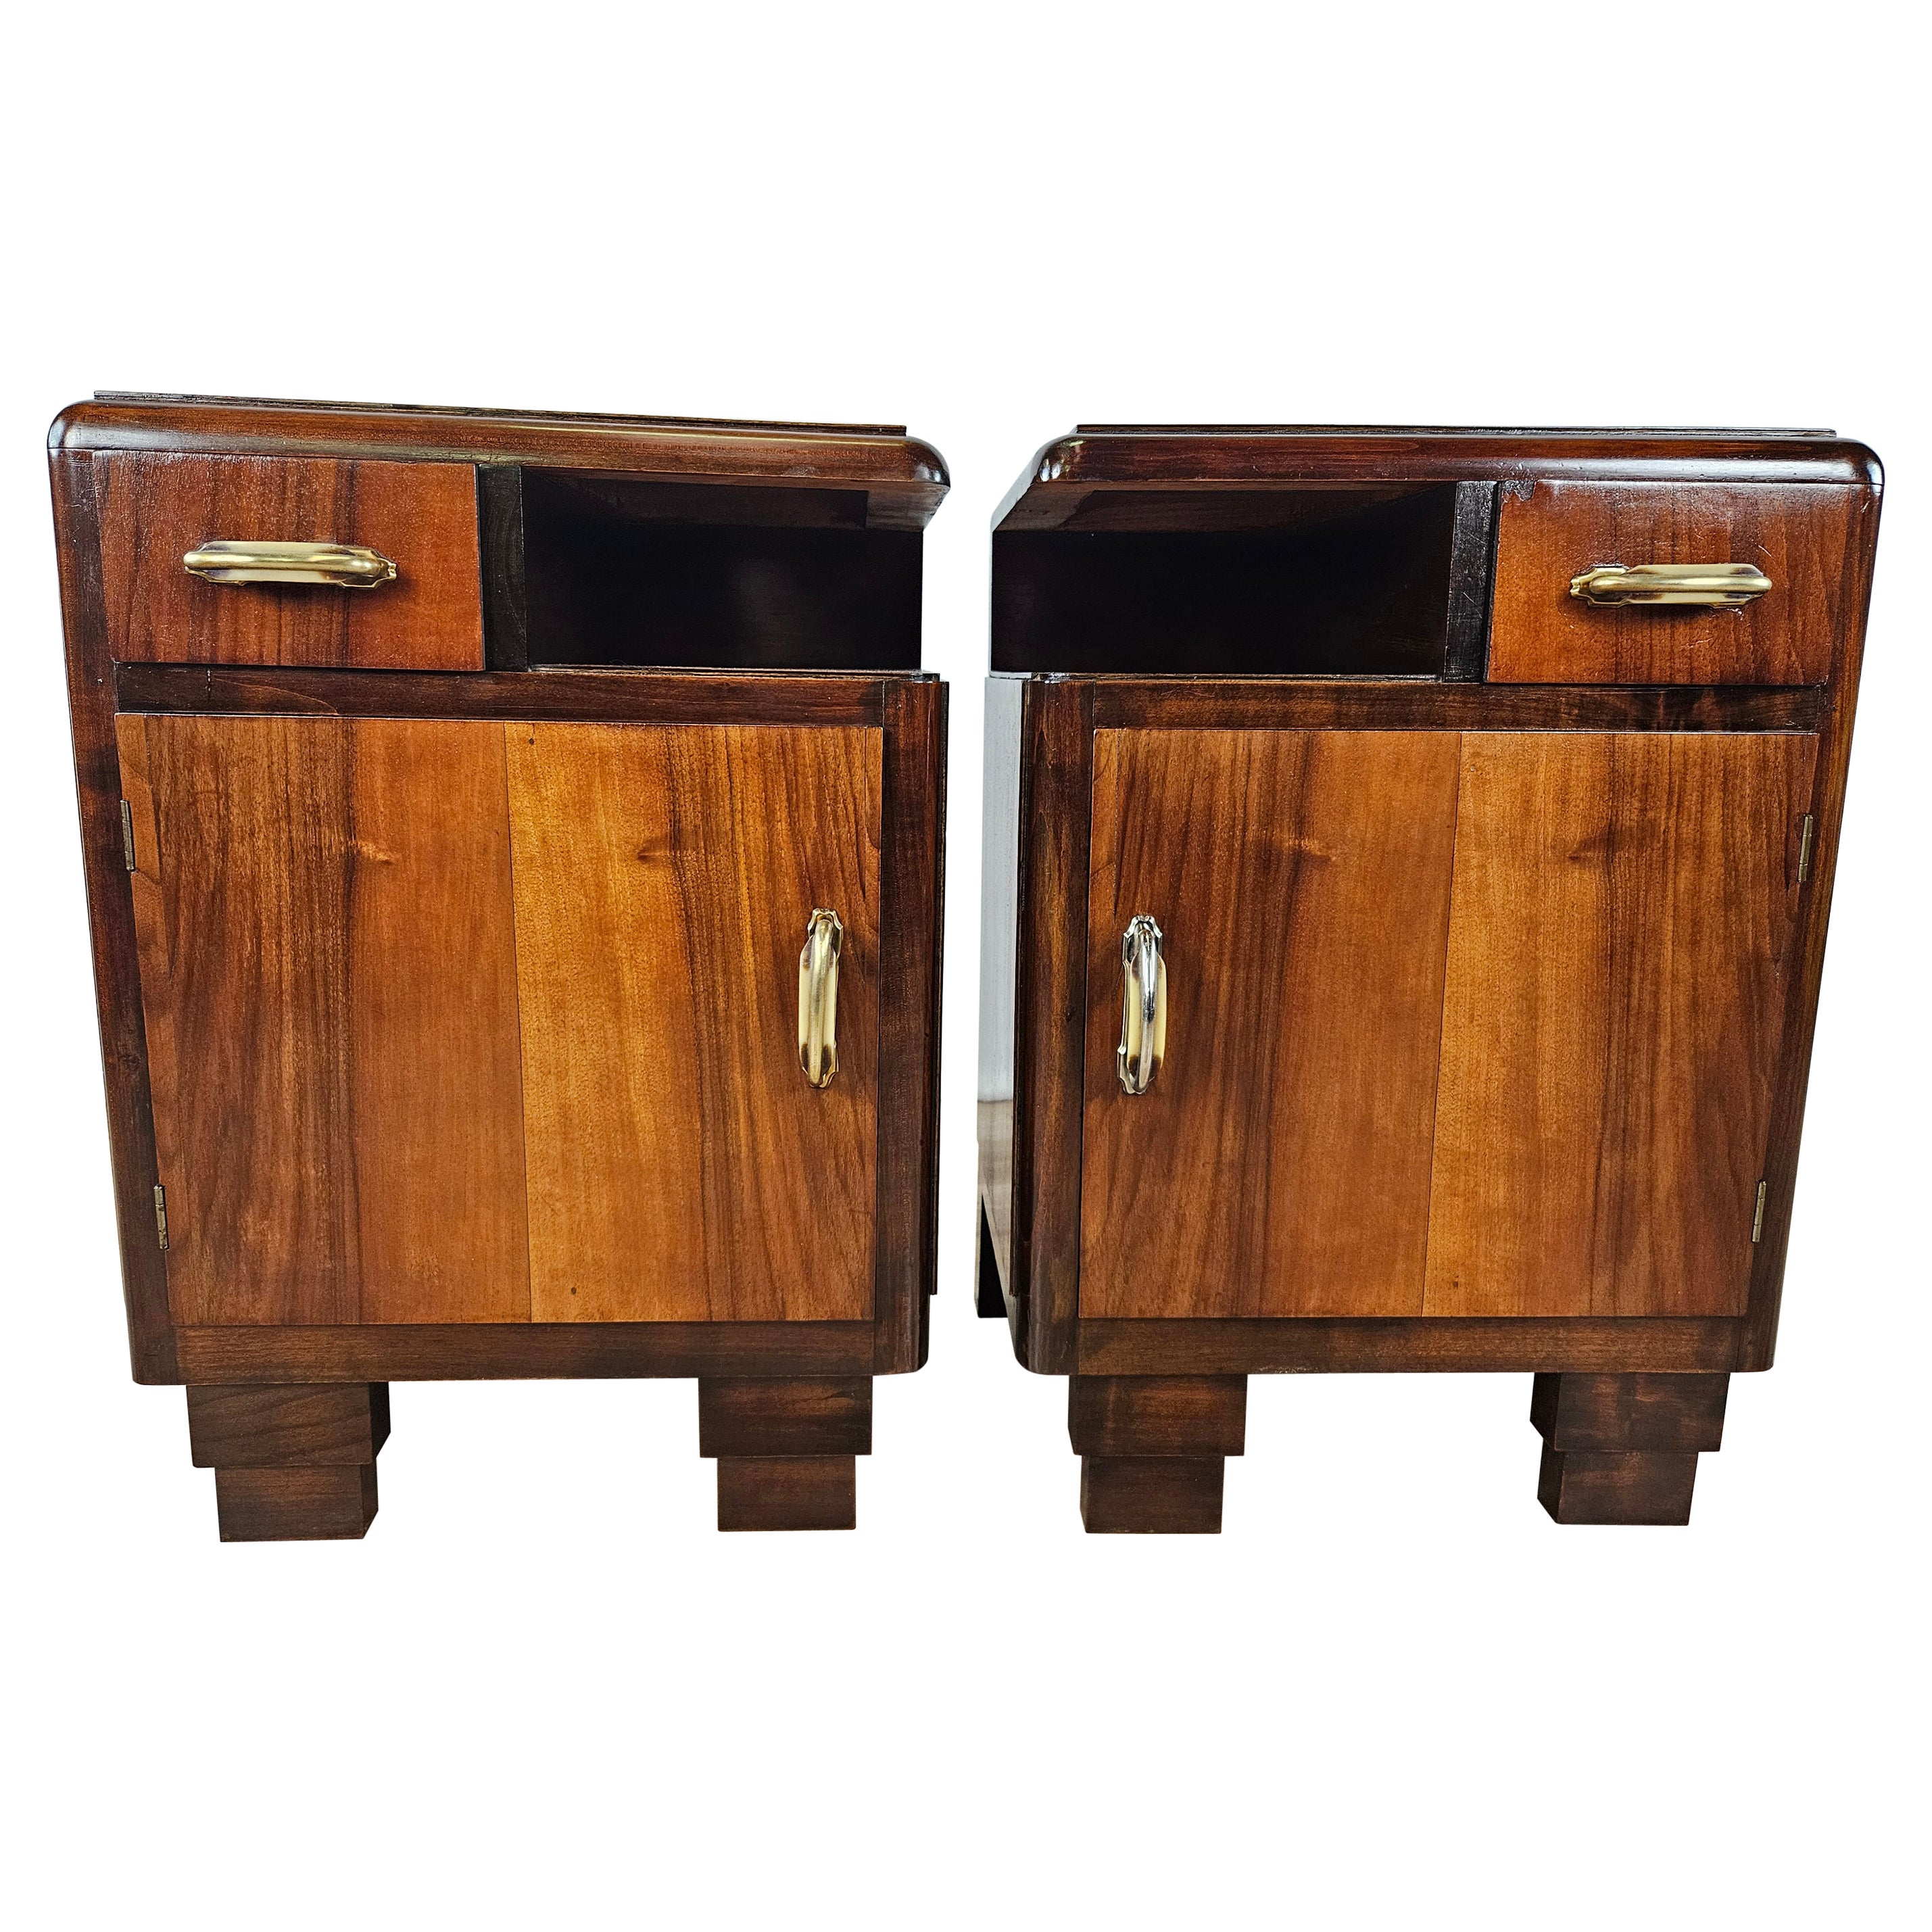 Art Deco style antique nightstands with door and drawer 20th century